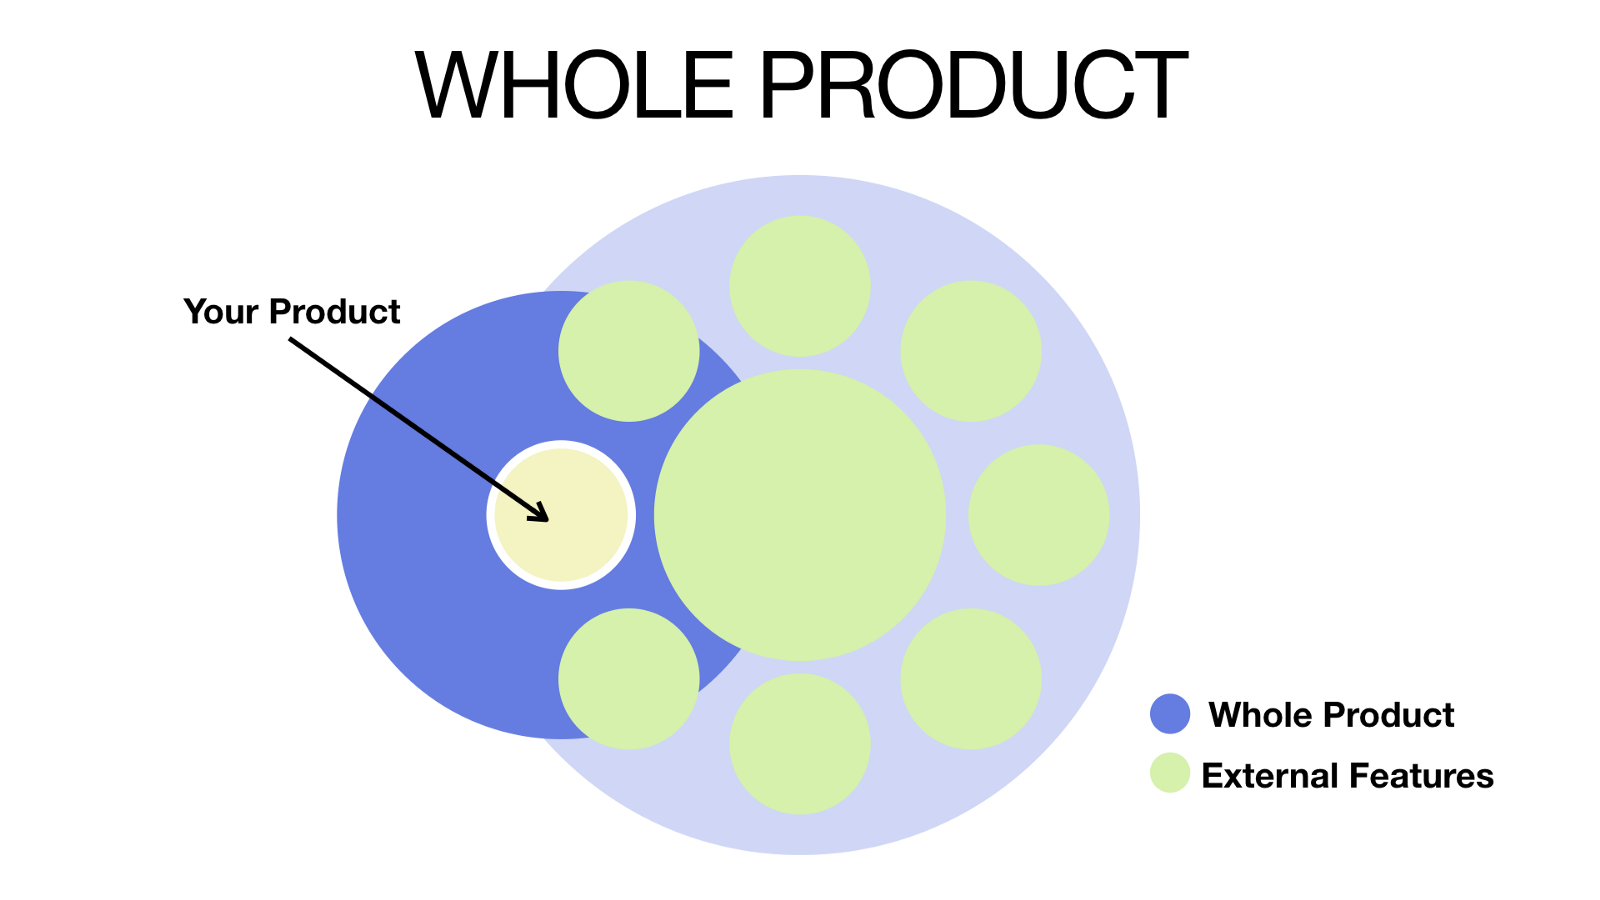 The Whole Product and your product diagram